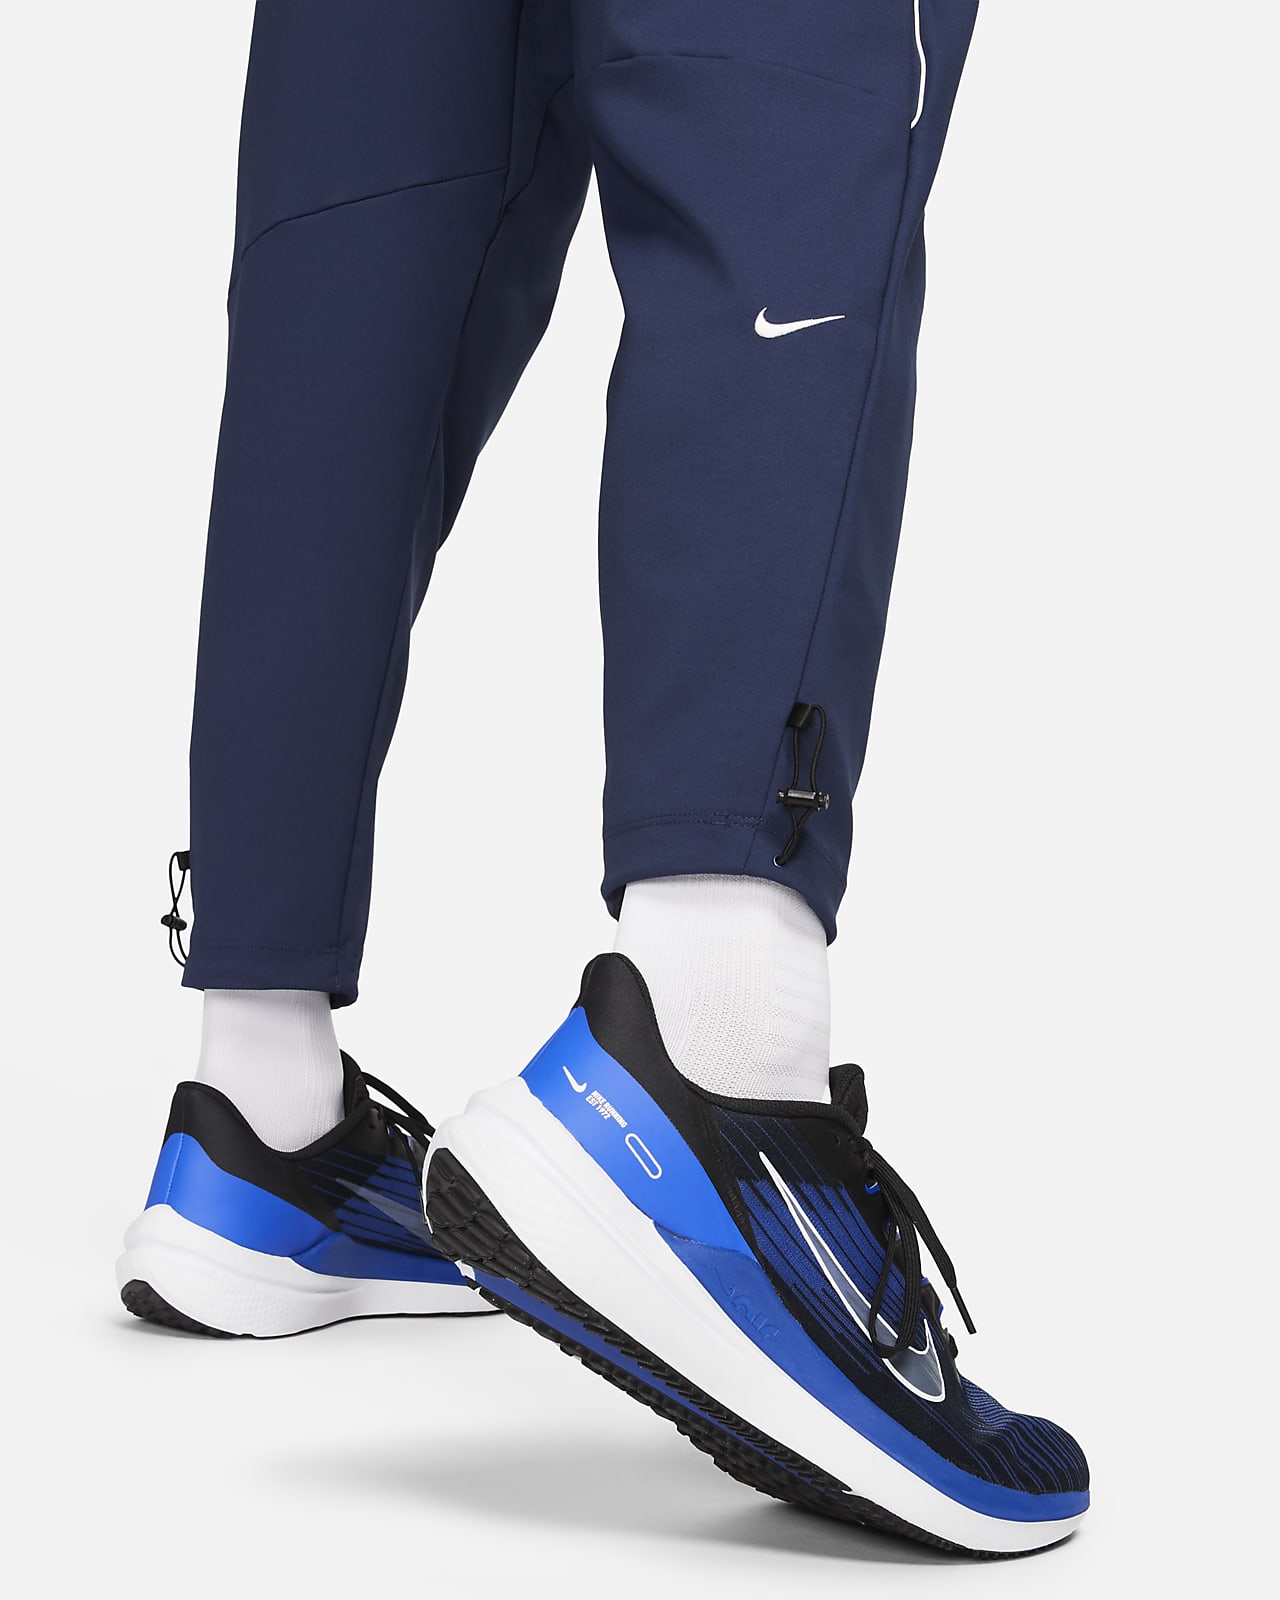 Nike Challenger Track Club Men's Dri-FIT Running Trousers. Nike IE